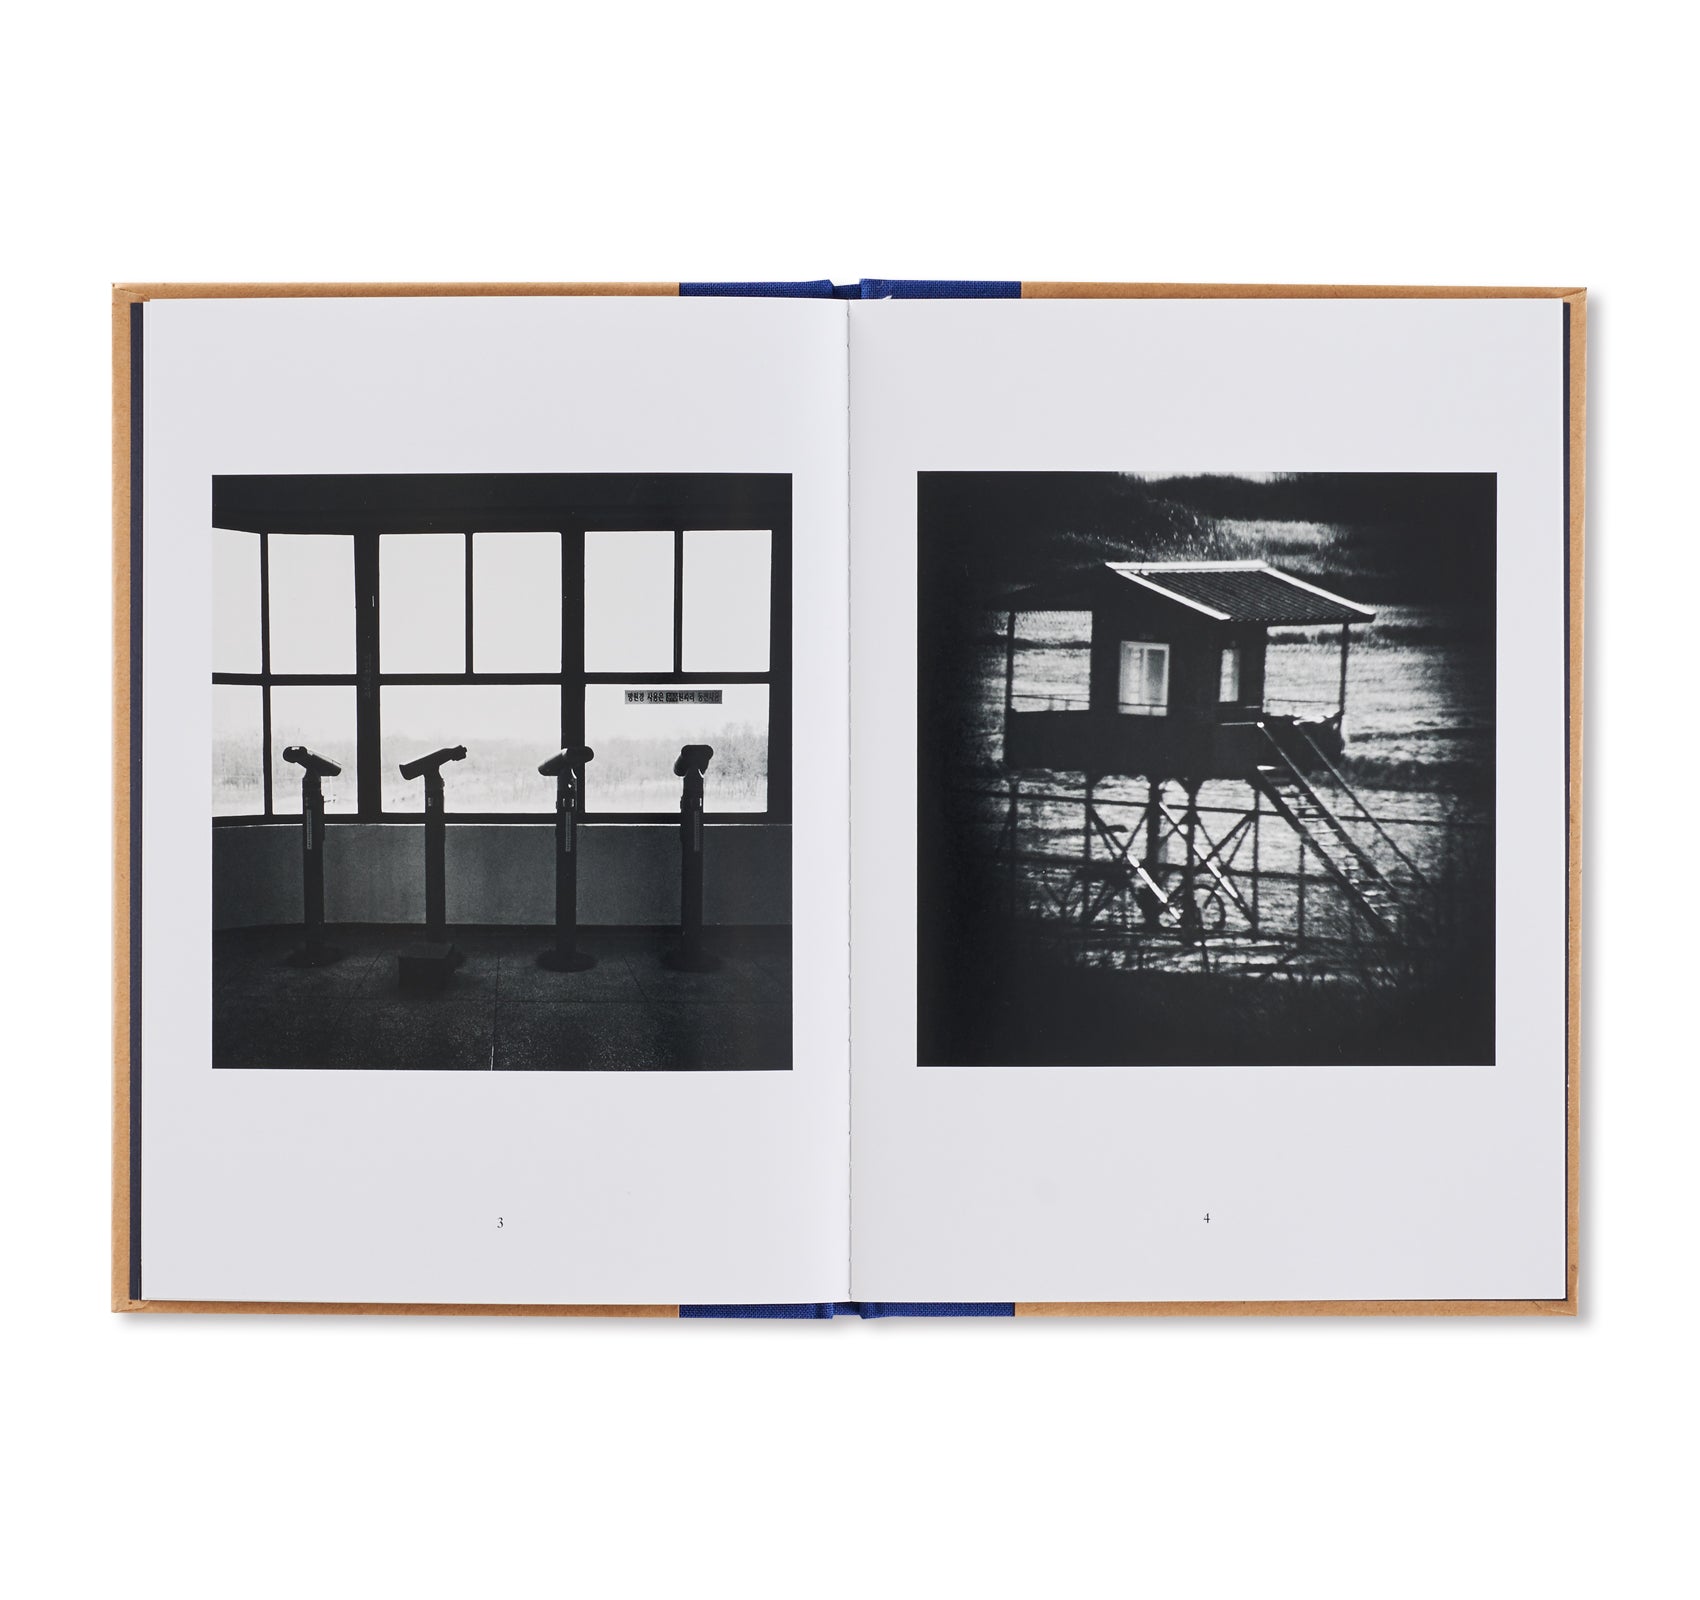 ONE PICTURE BOOK TWO #01: DMZ - THE 38TH PARALLEL by Michael Kenna